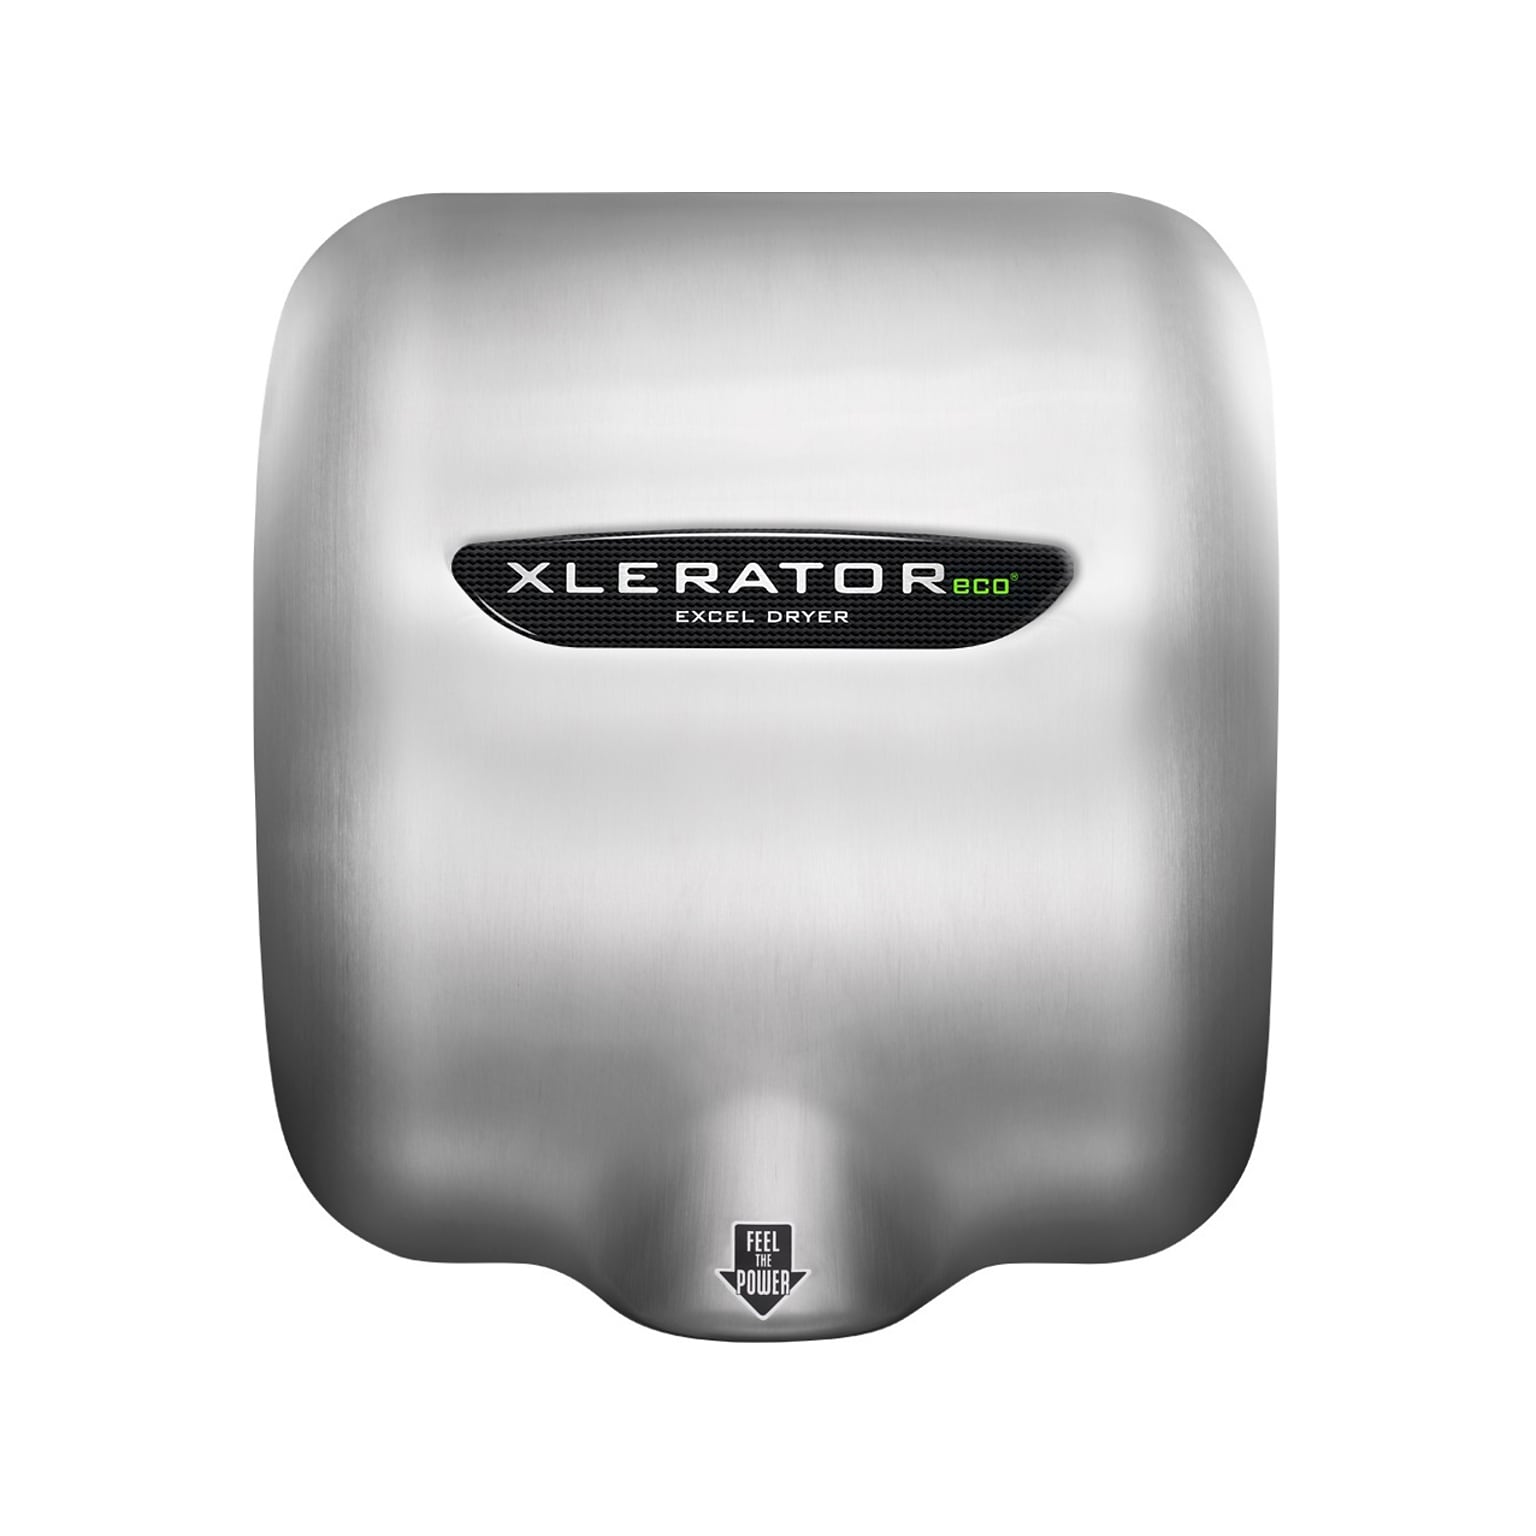 XLERATOReco 208-277V Automatic Hand Dryer, Brushed Stainless Steel (704166H)